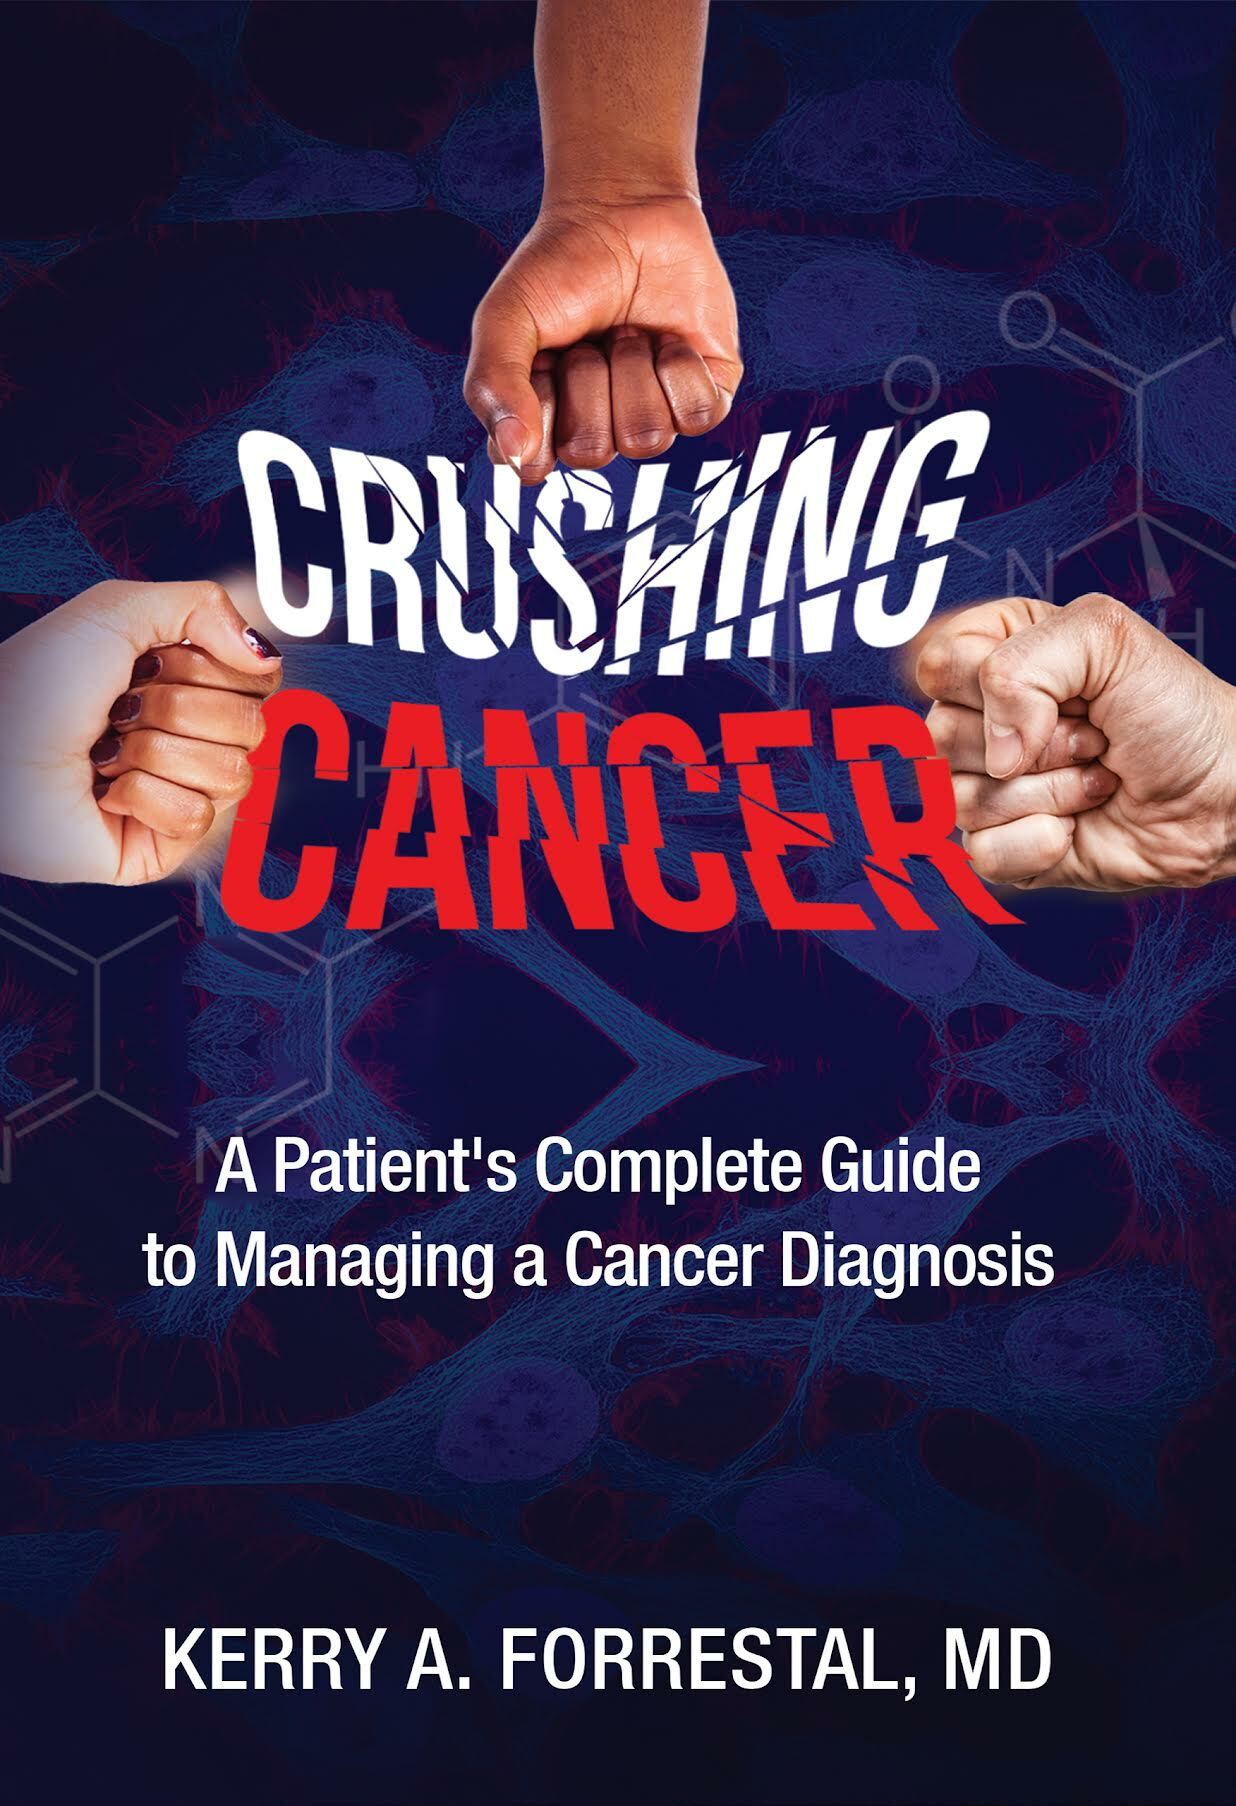 Dr. Kerry Forrestal's new book 'Crushing Cancer - A Patient's Complete Guide to Managing a Cancer Diagnosis.'